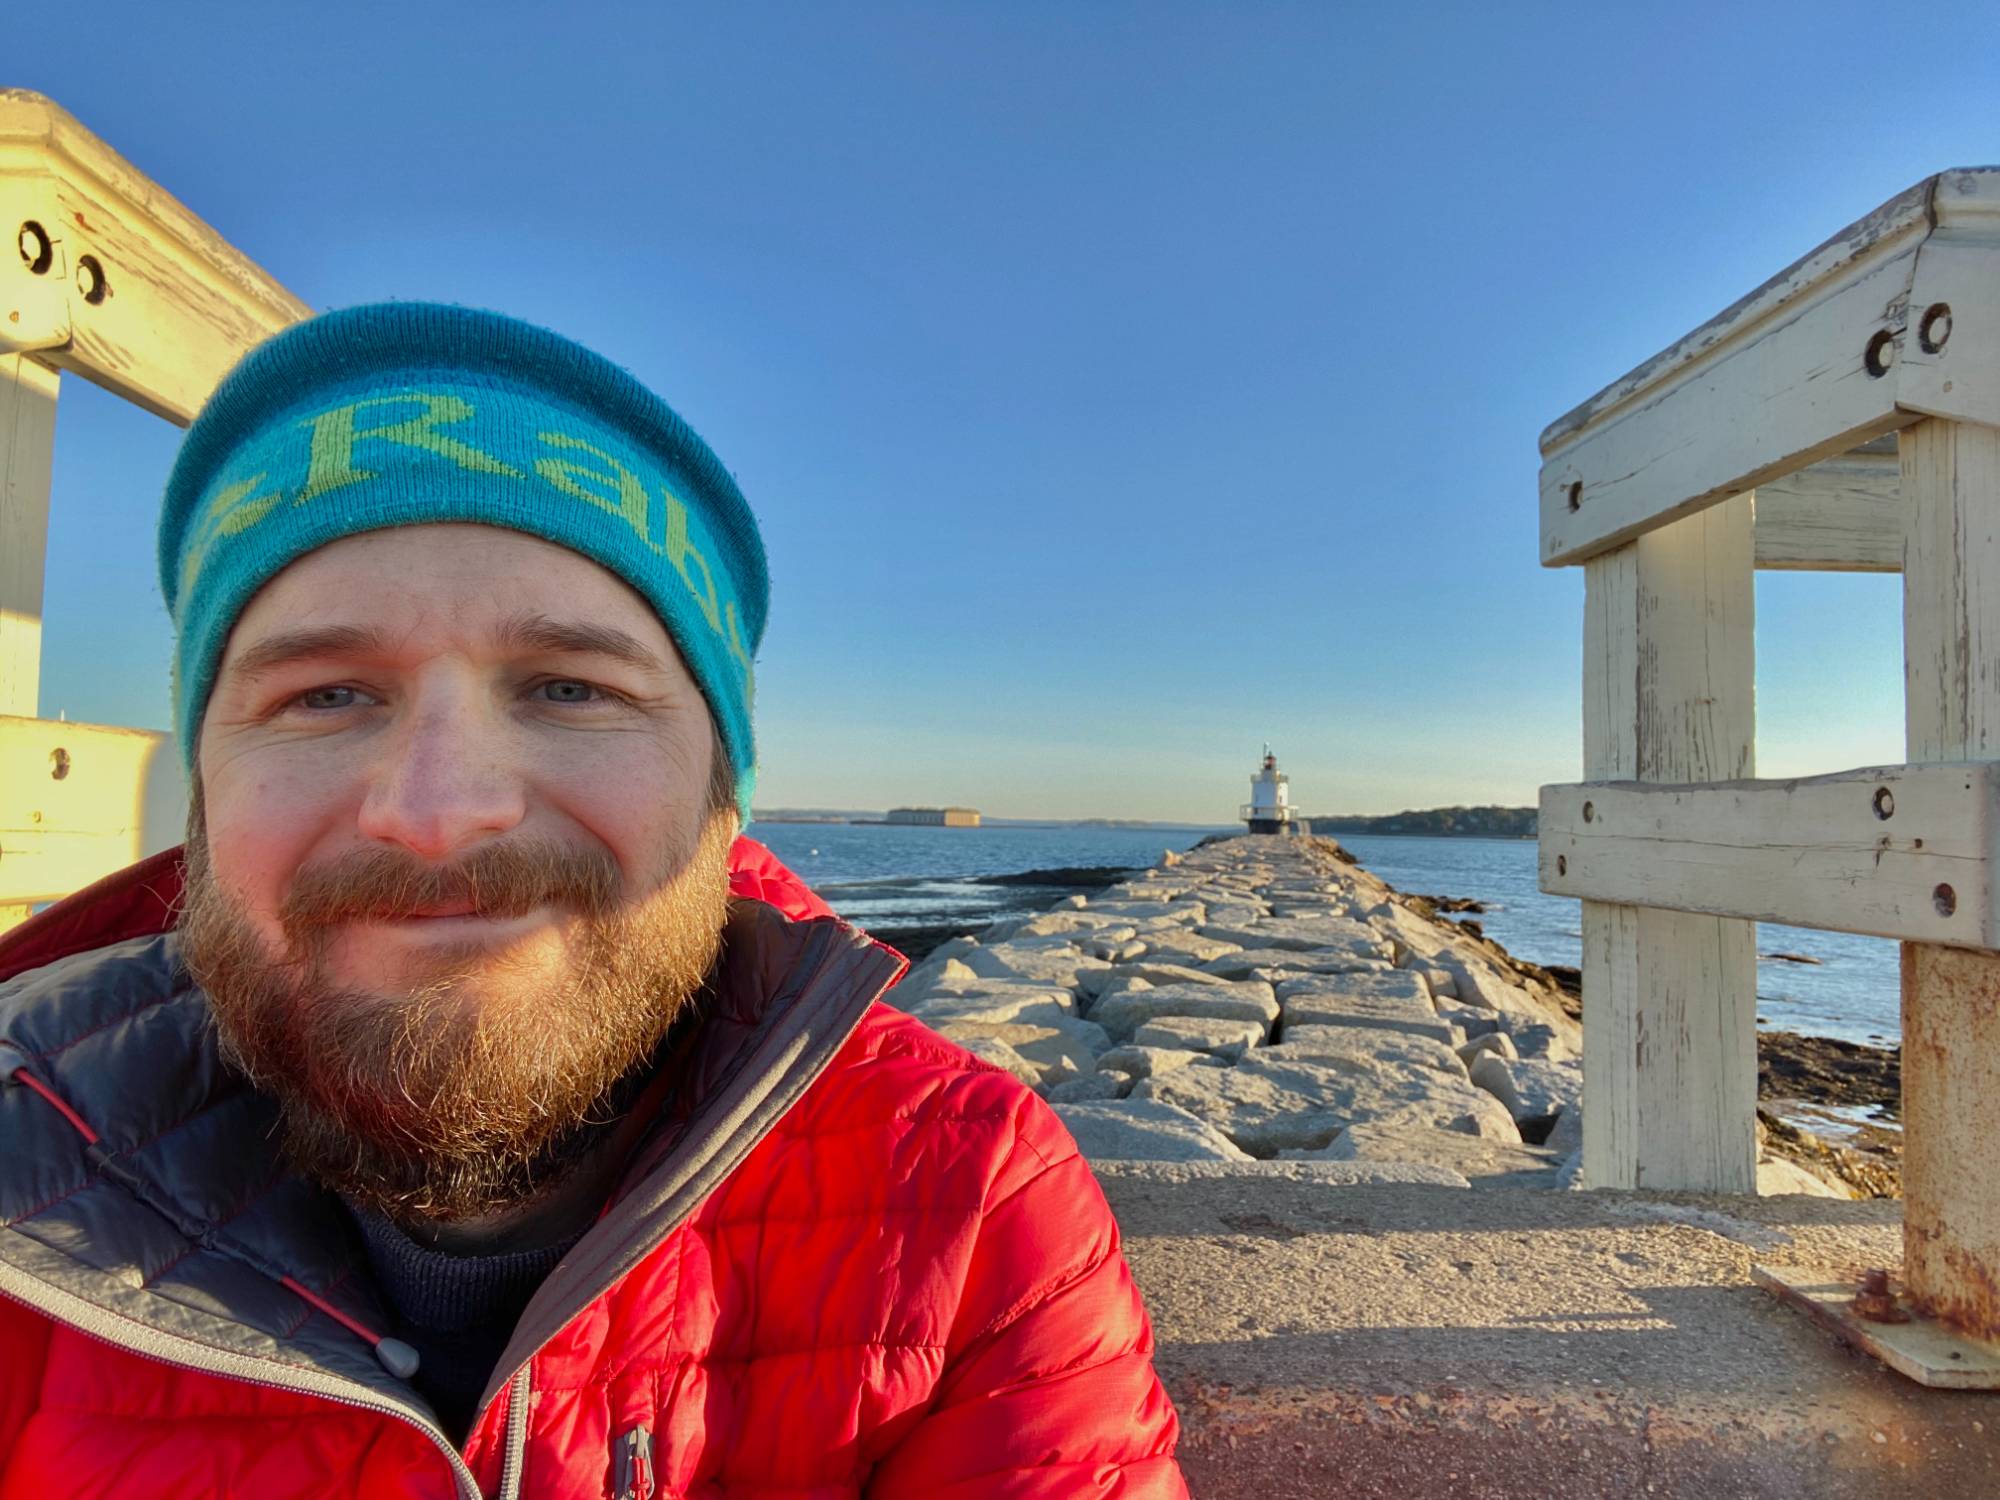 Michael Wicker in front of a light house smiling